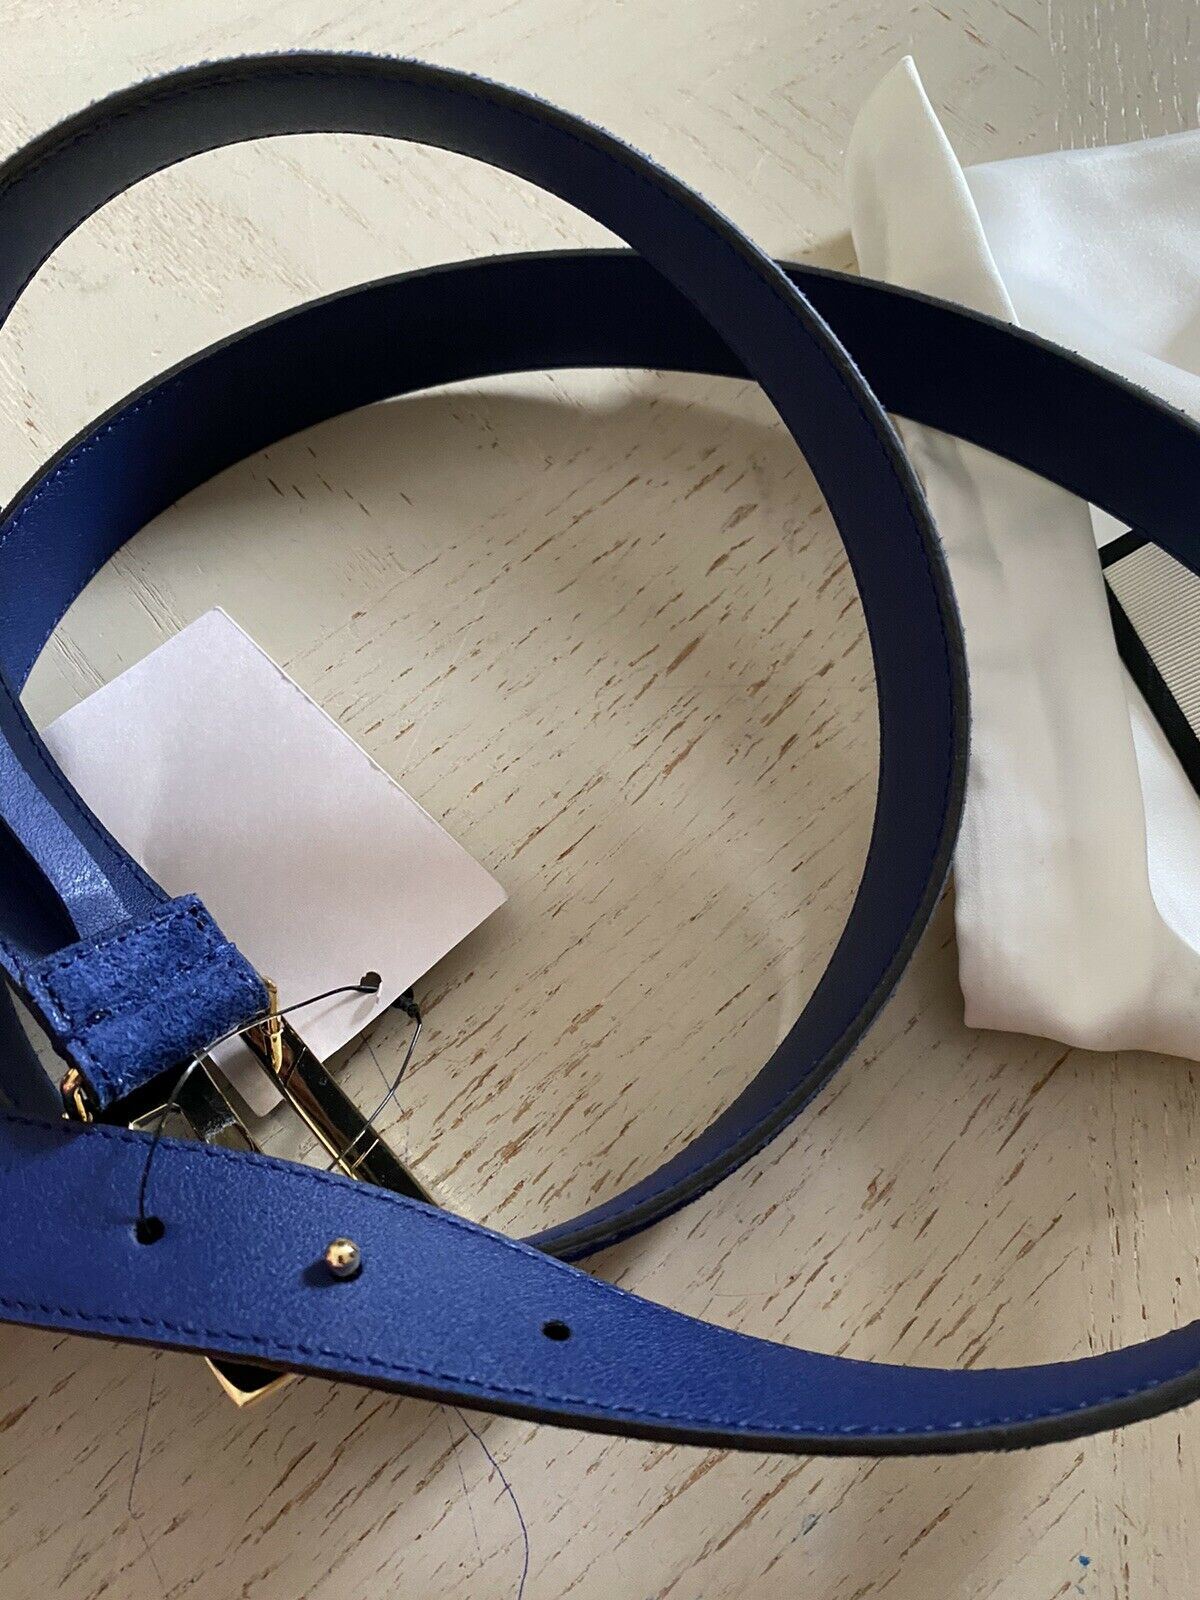 New $890 Gucci Mens Suede GG Belt Navy 110/44 Italy